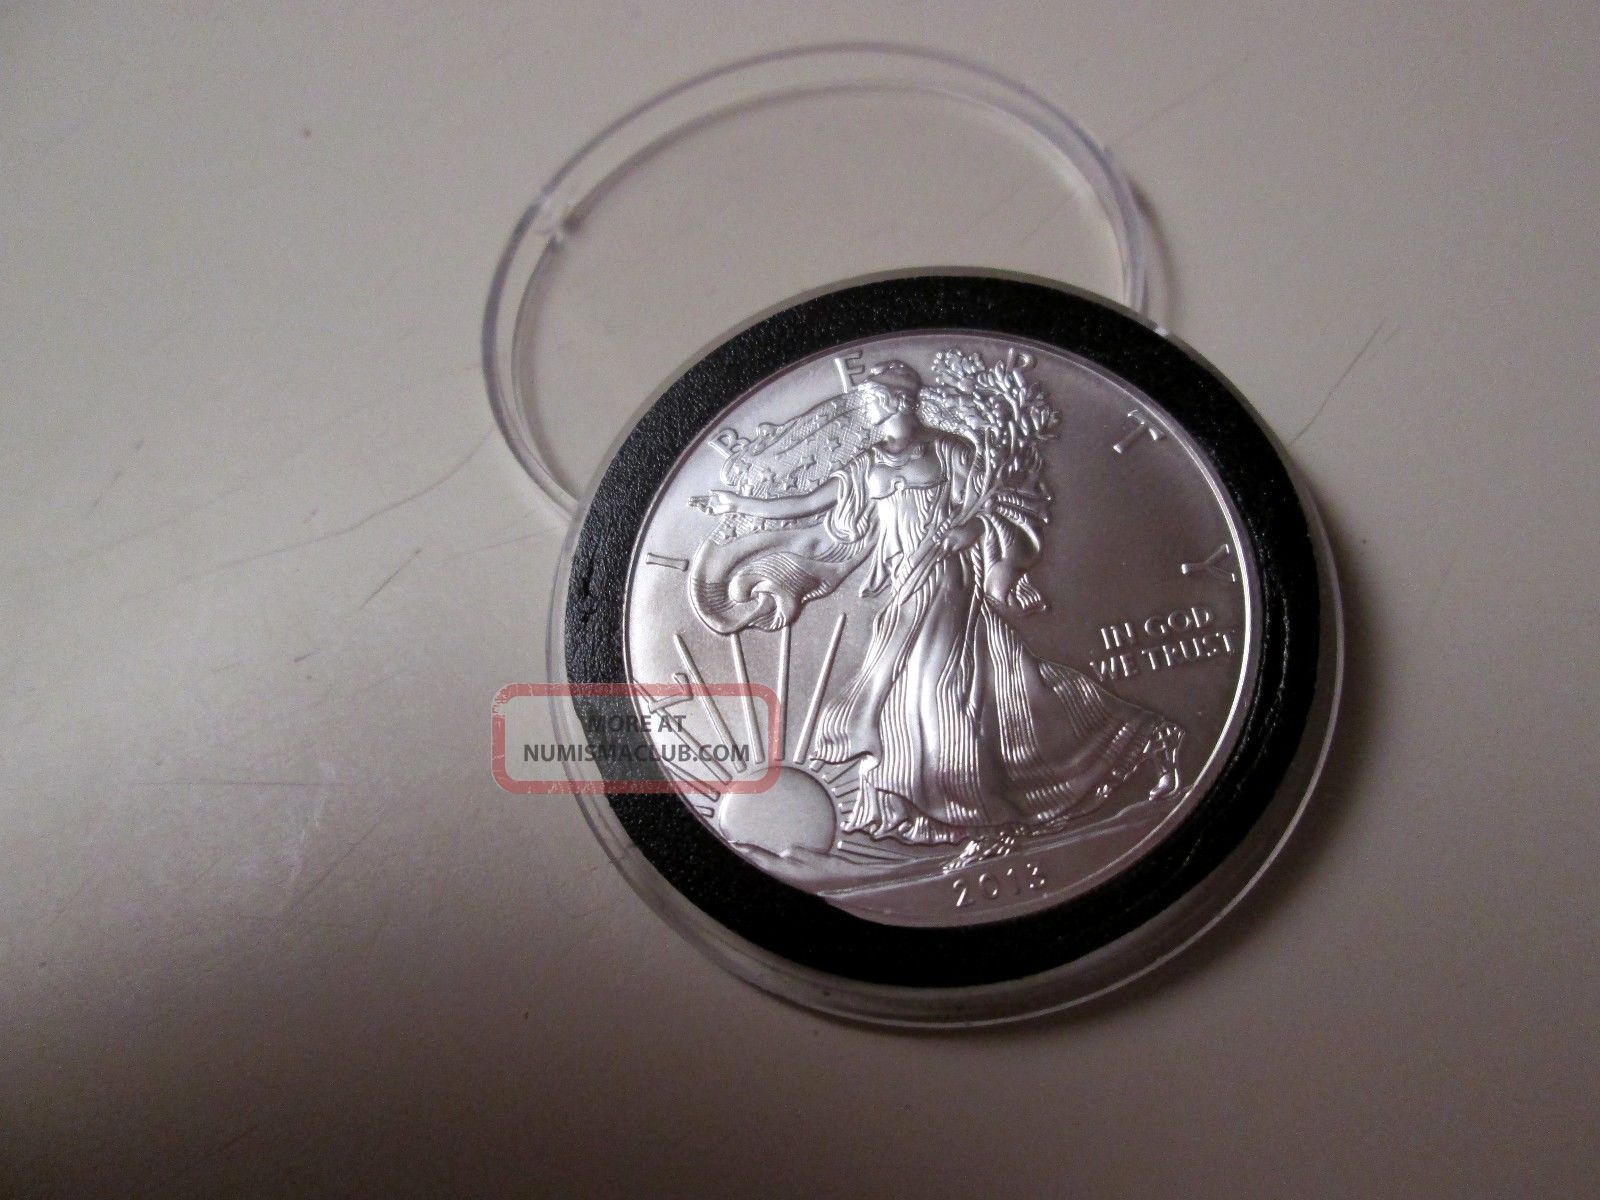 Uncirculated 2013 1 Oz Silver American Eagle Coin In Air Tite Capsule